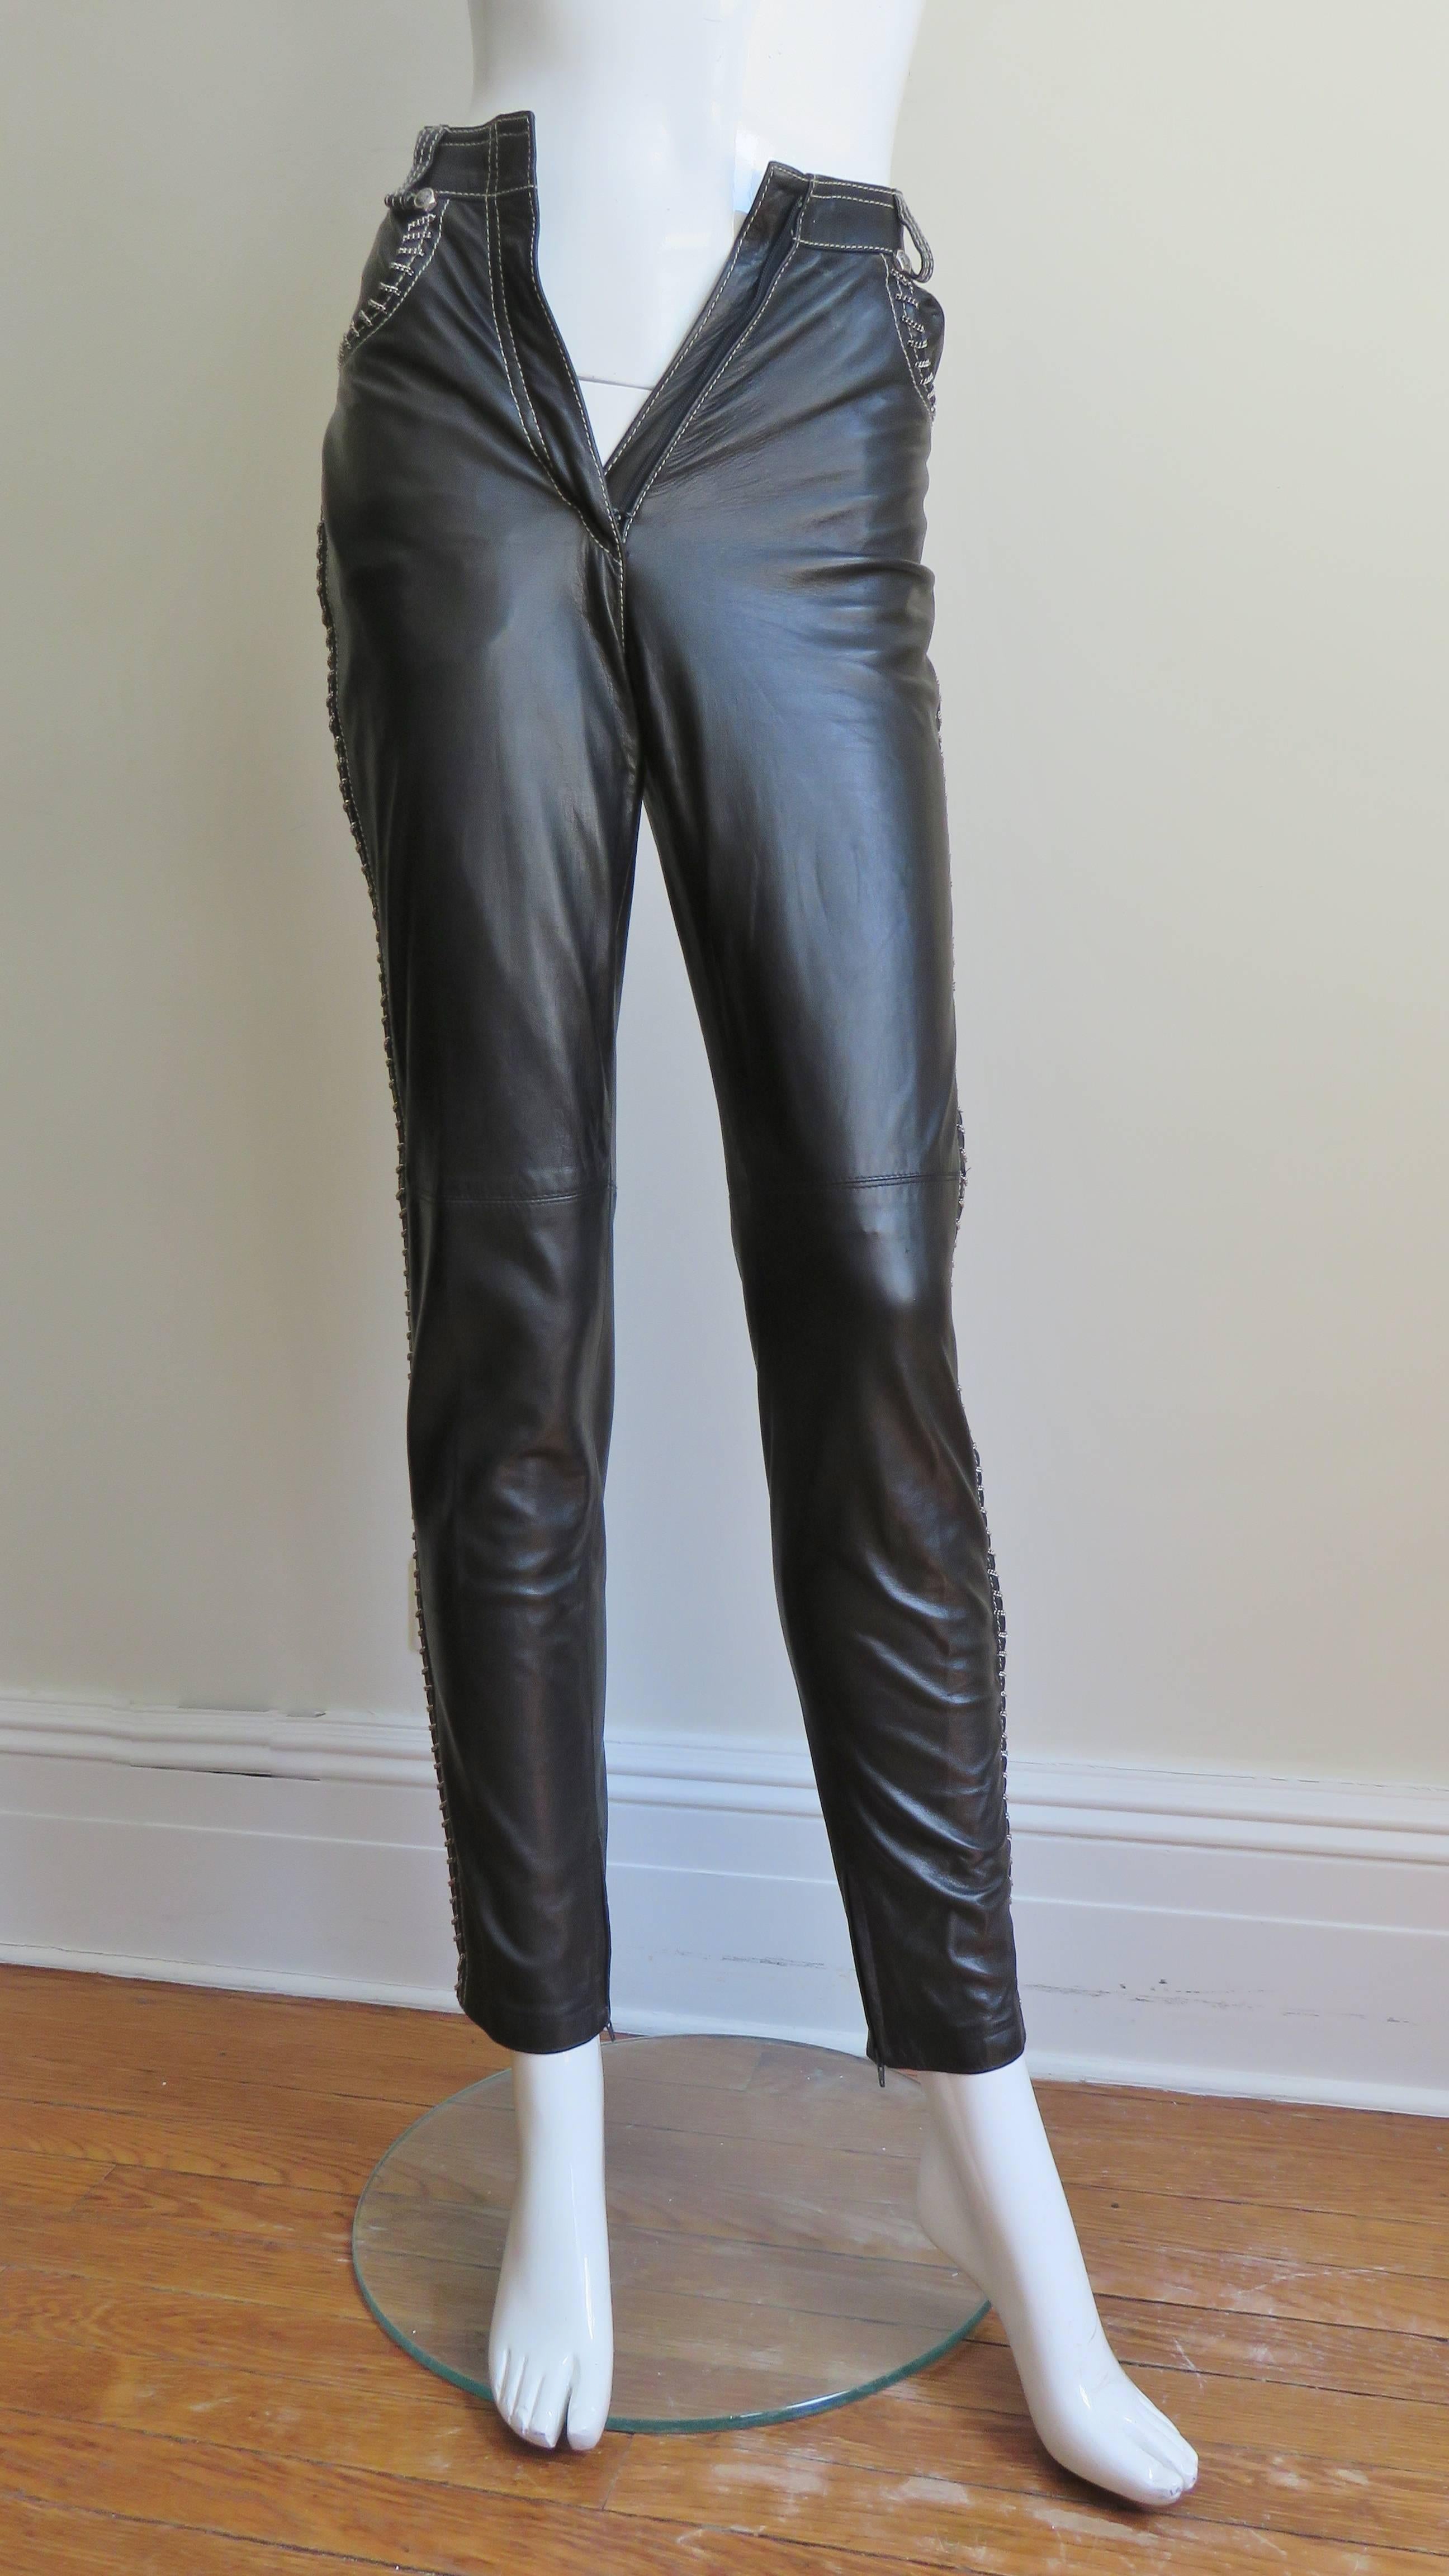  Gianni Versace A/W 1992 Leather Motorcycle Jacket and Pants With Chain Trim  For Sale 3